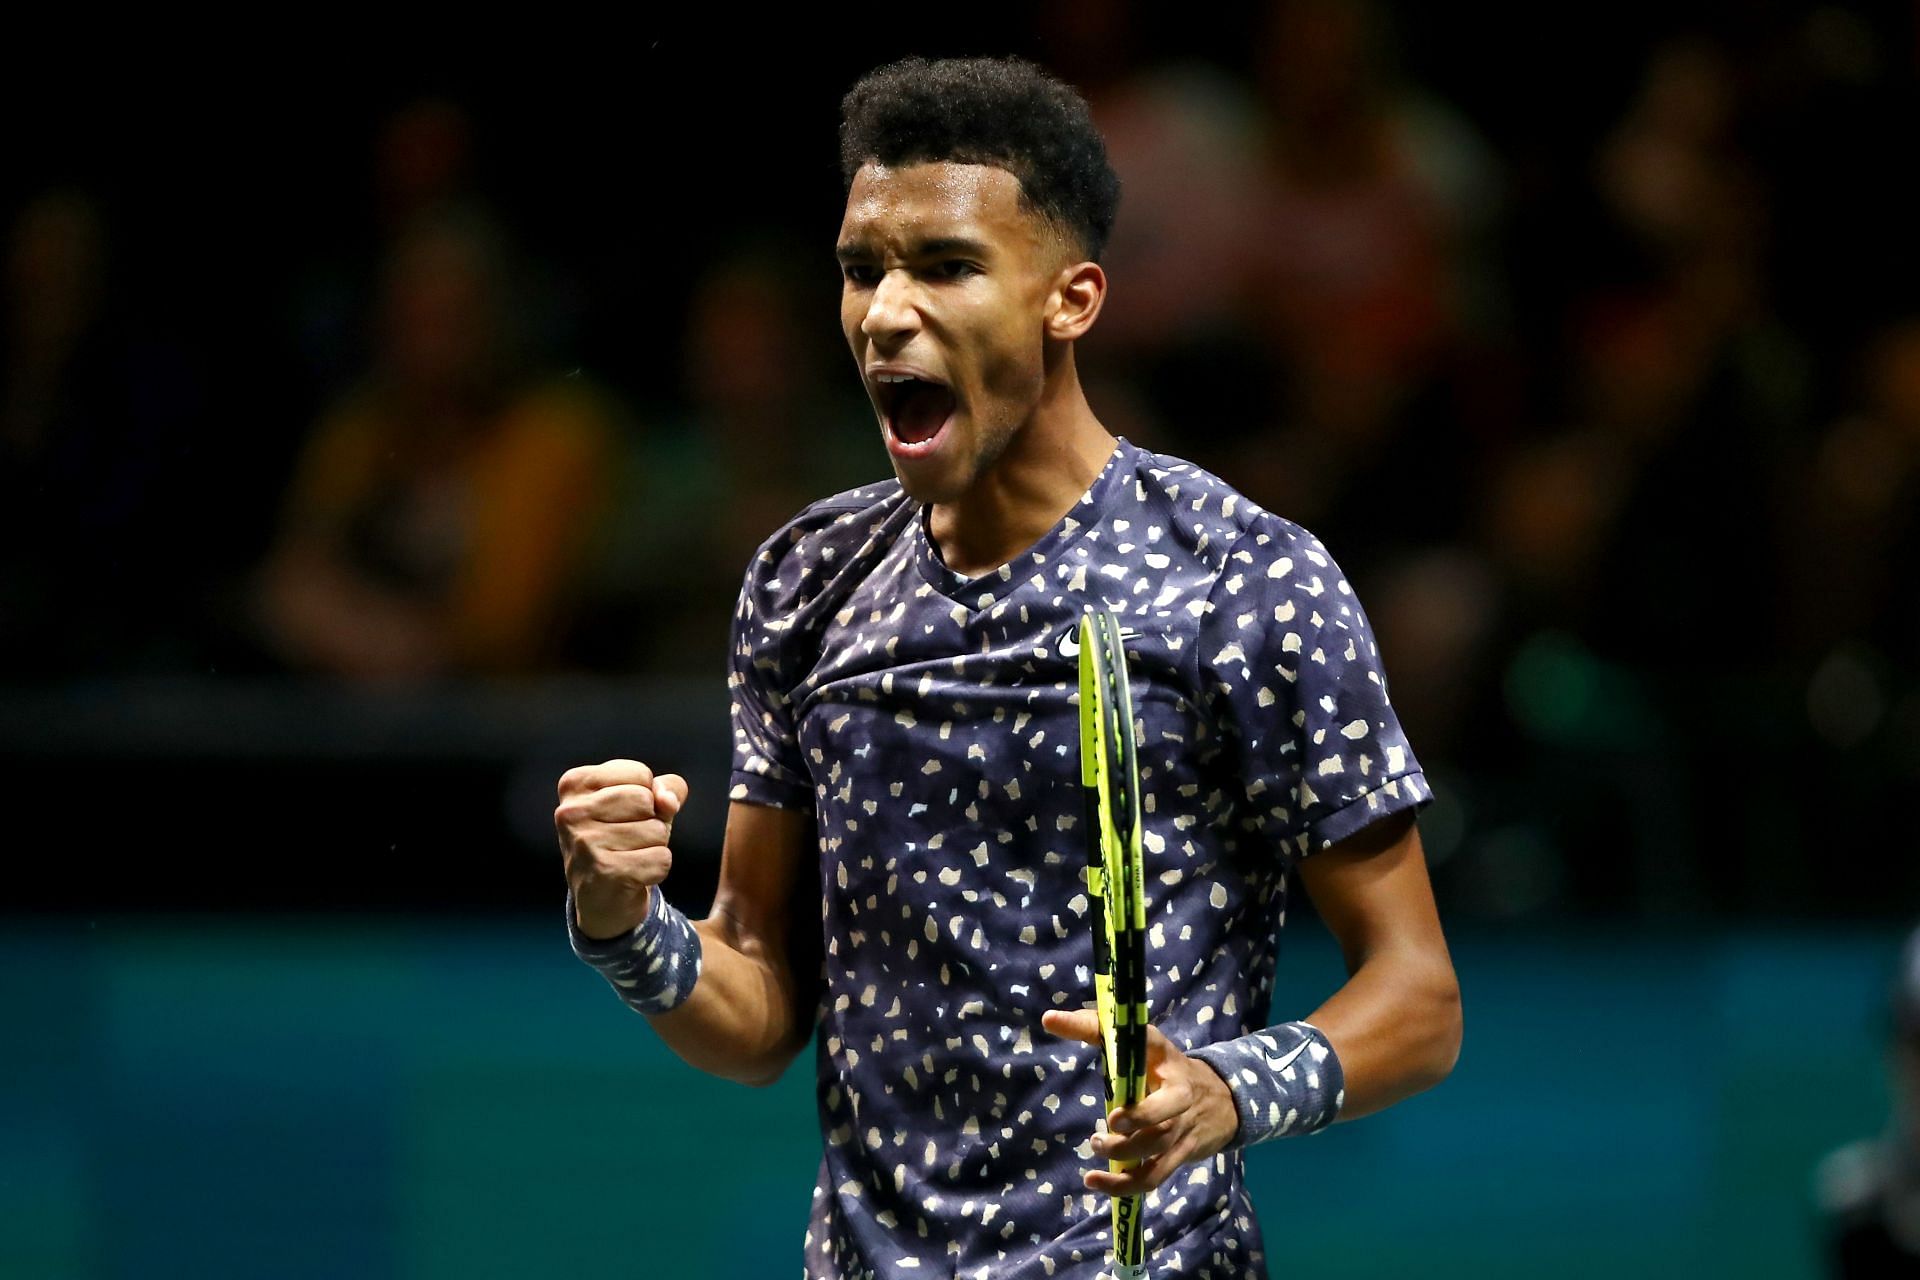 Felix Auger-Aliassime pictured at the World Tennis Tournament.